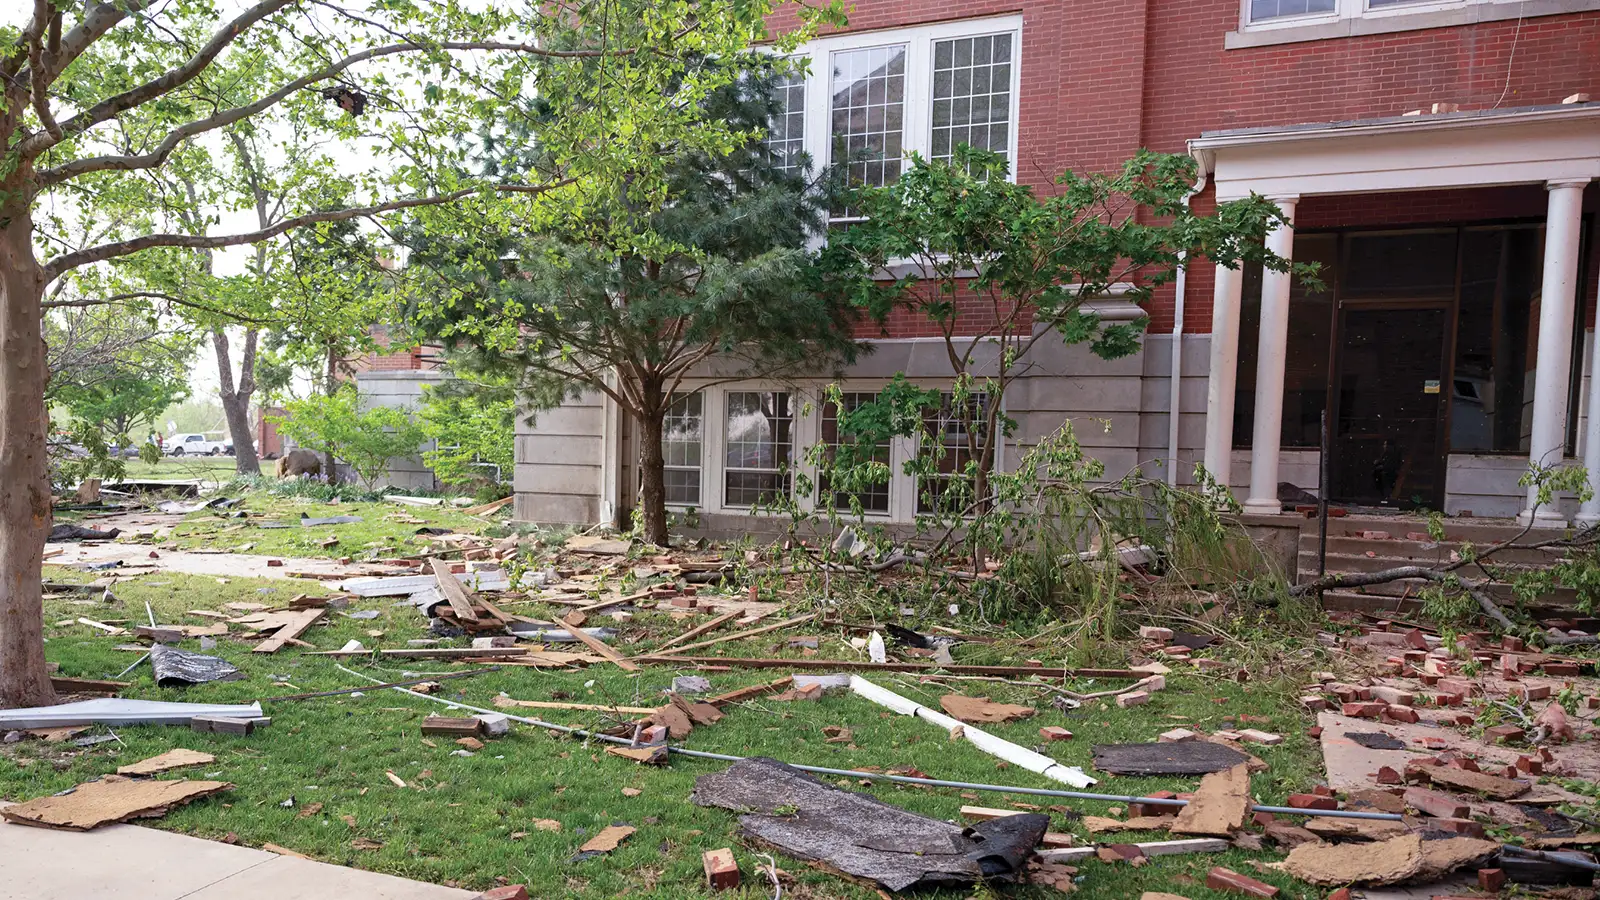 Debris is scattered on the ground outside Shawnee Hall